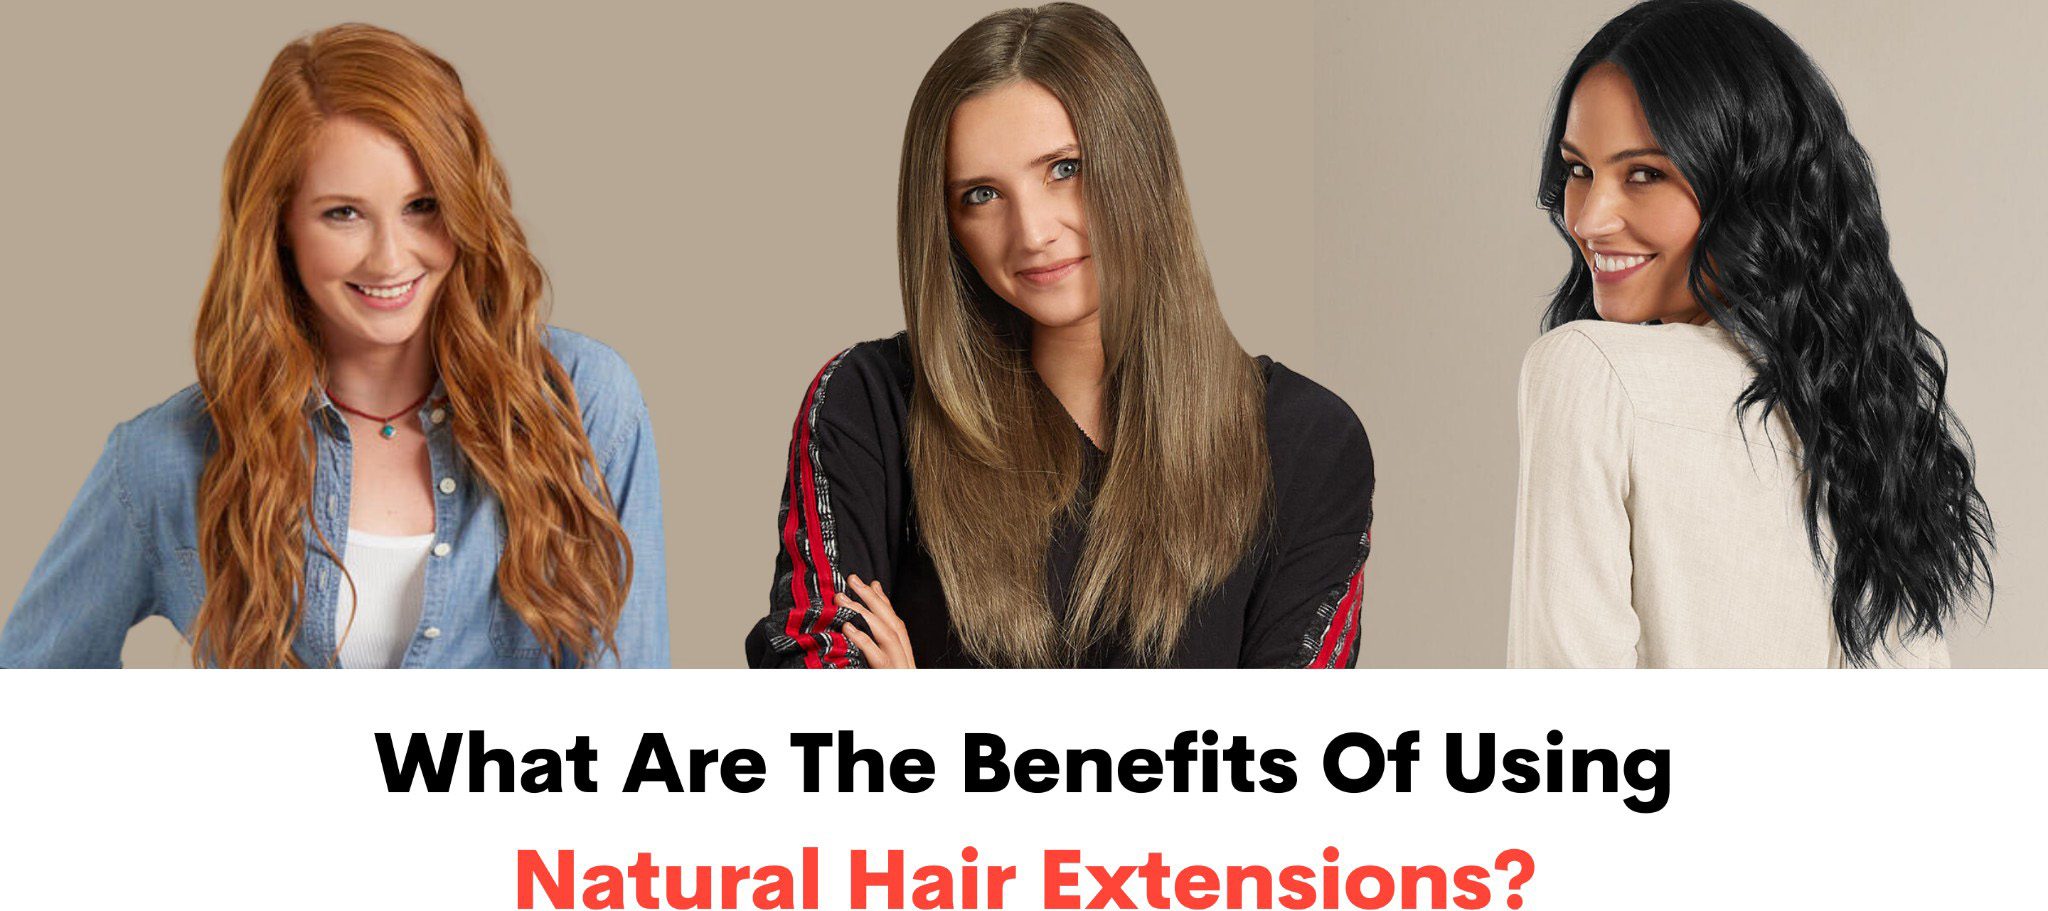 What Are The Benefits Of Using Natural Hair Extensions?